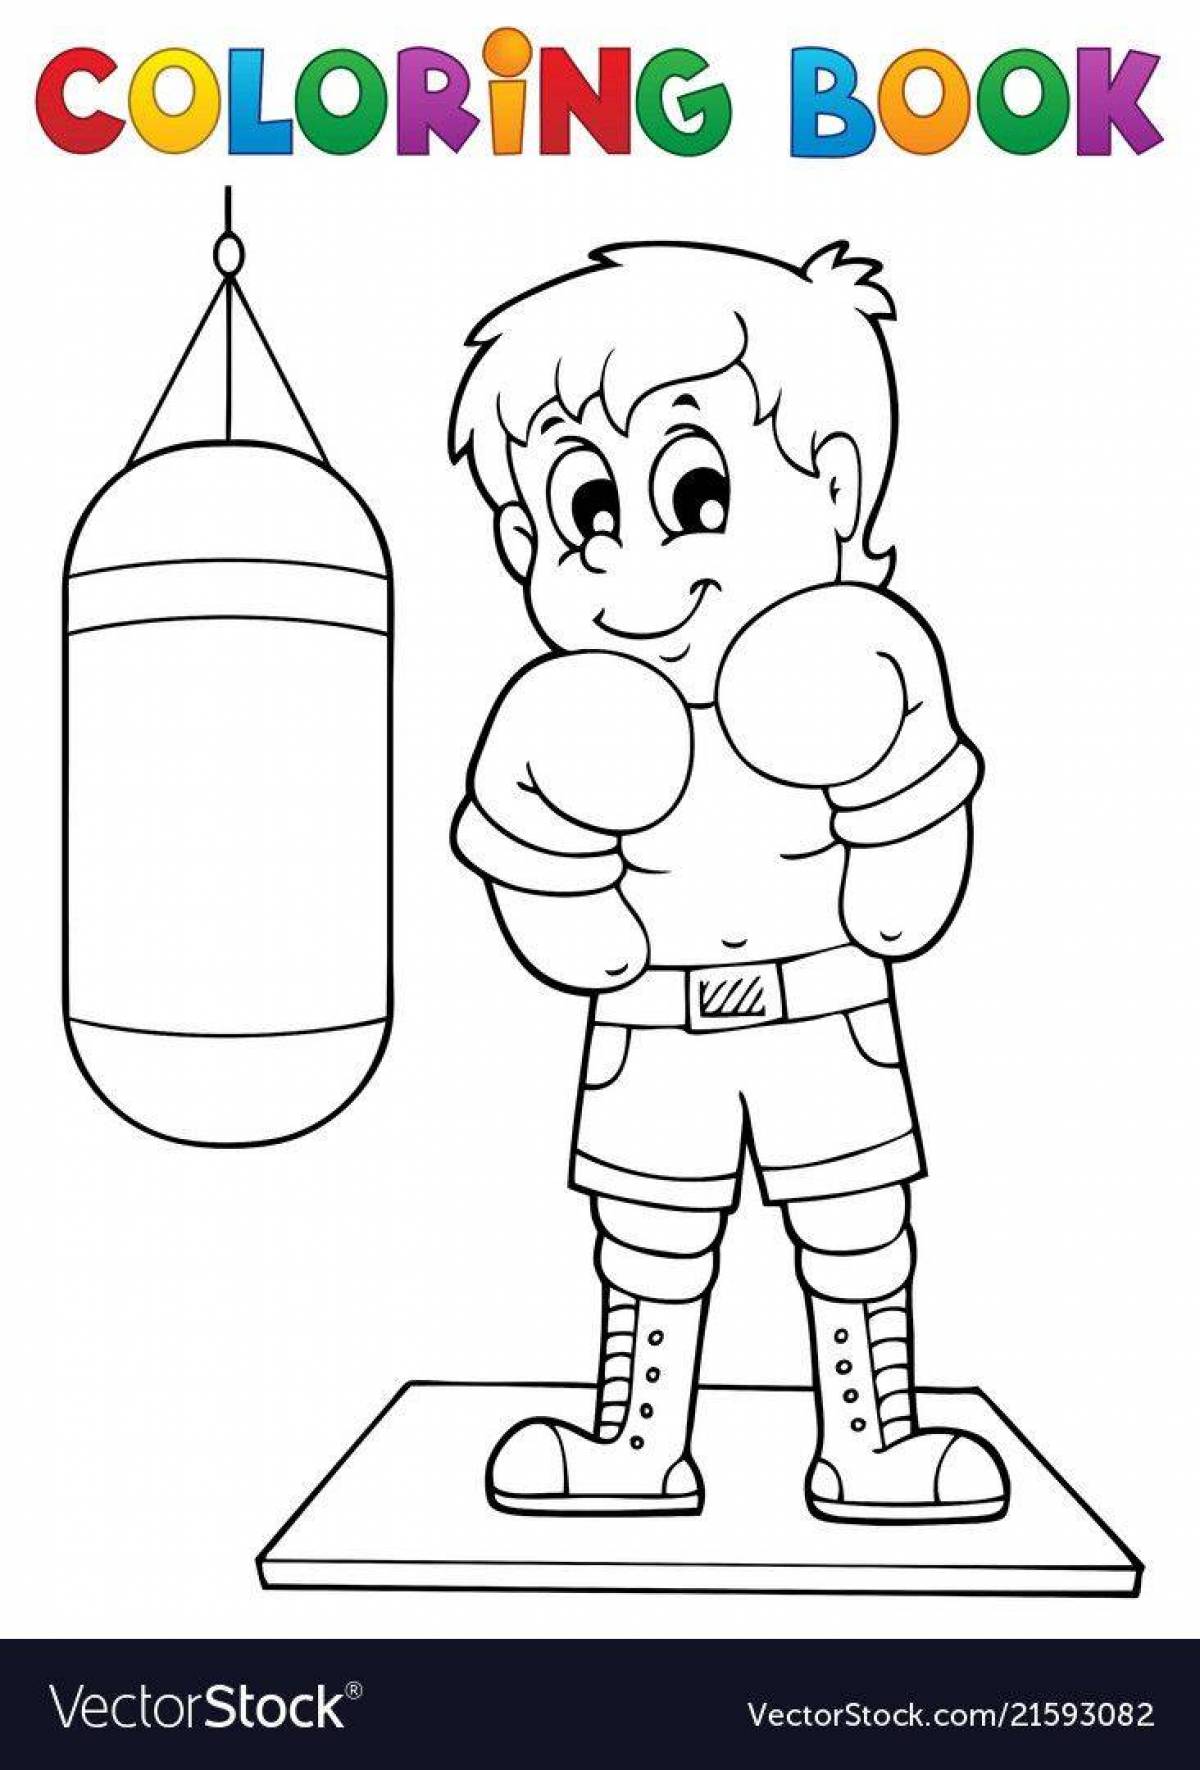 Live boxing and coloring boo